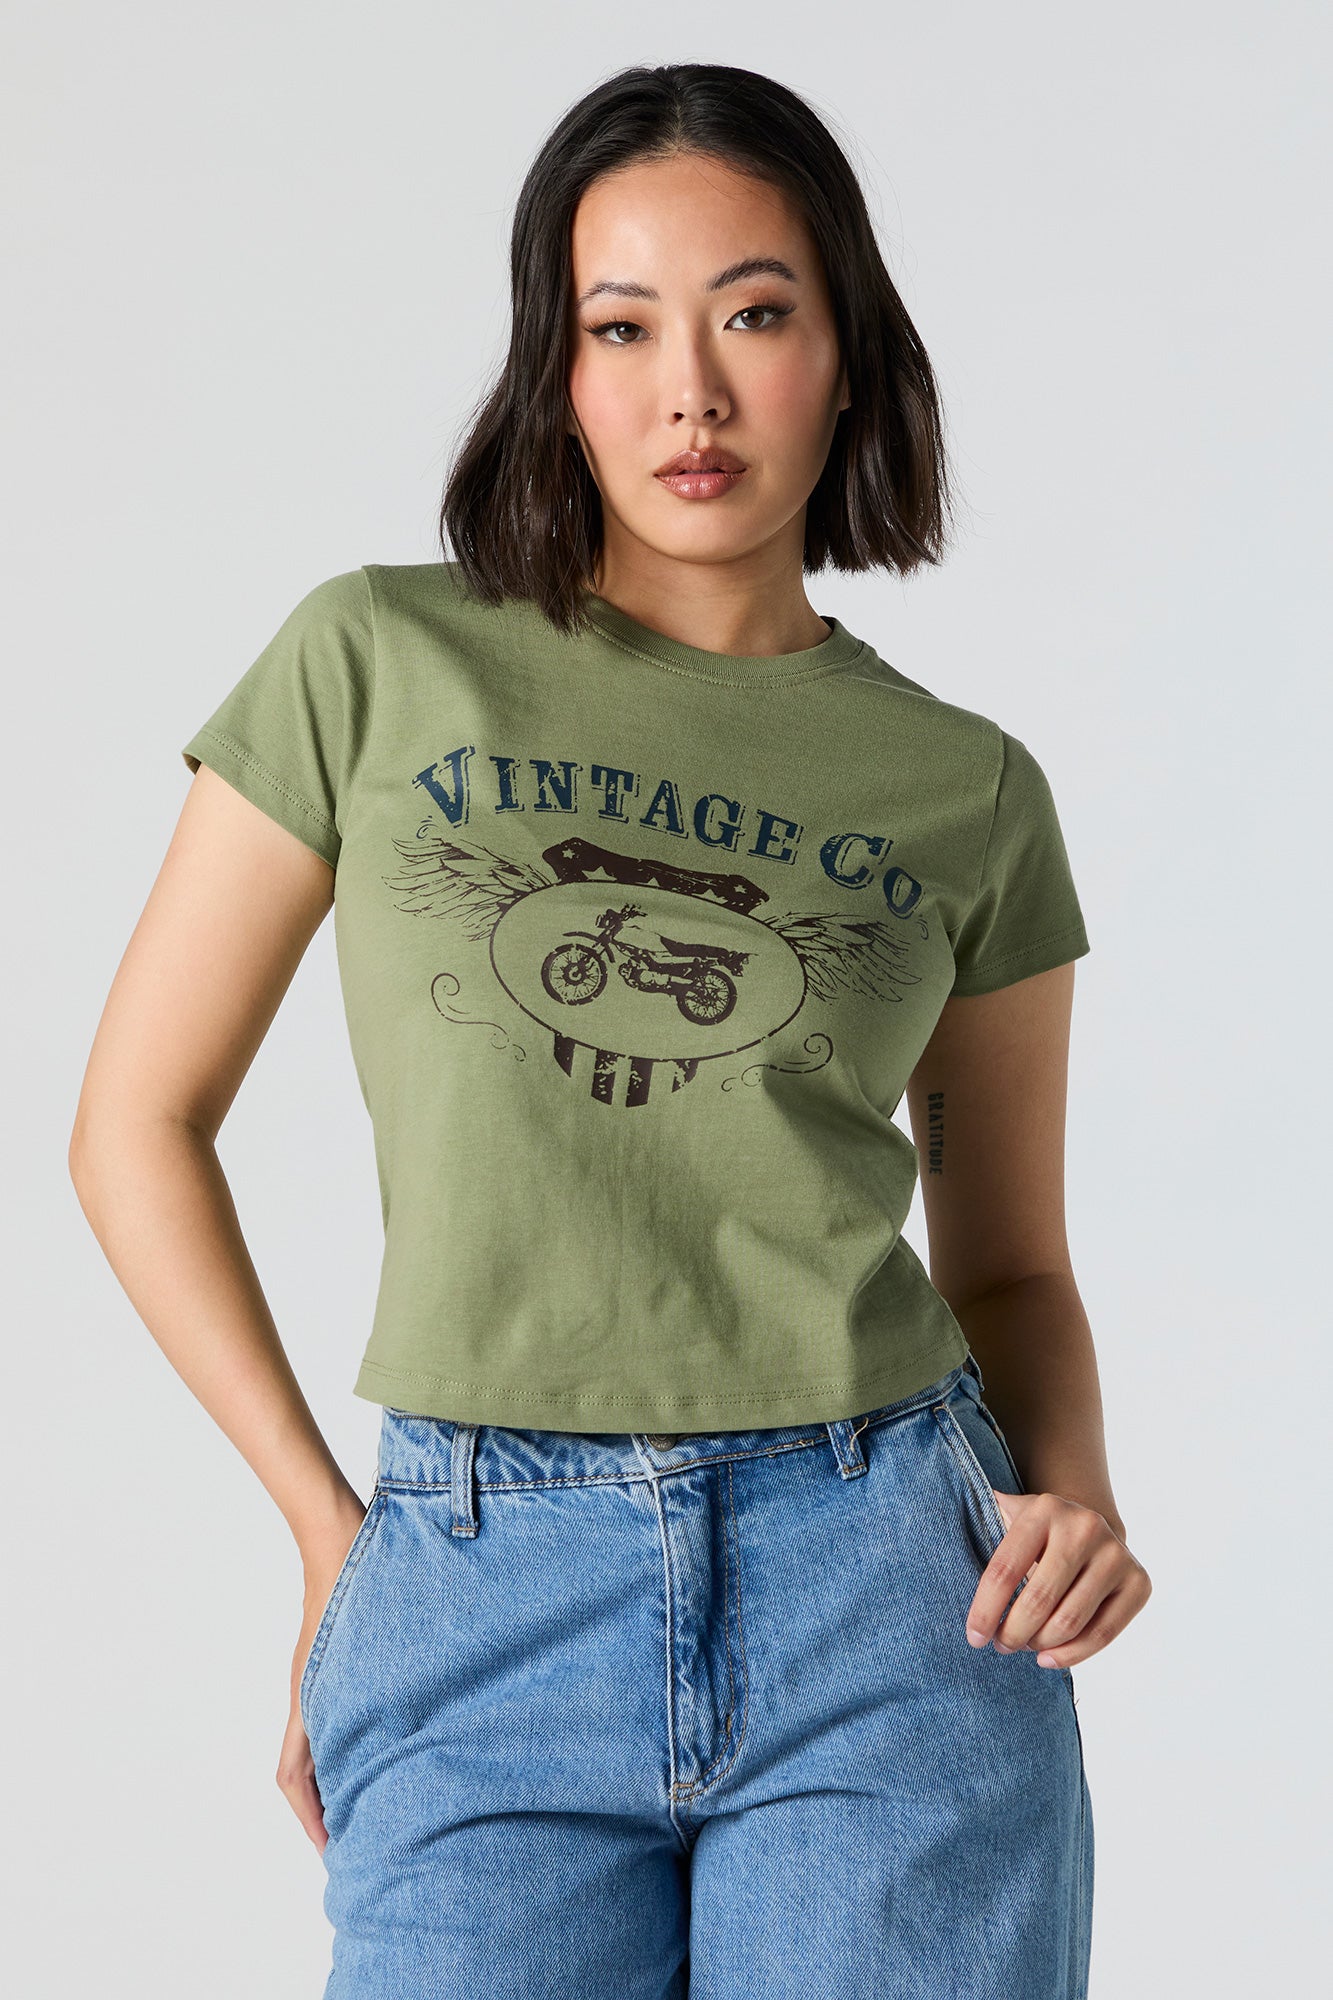 Vintage Co Graphic Baby T-Shirt